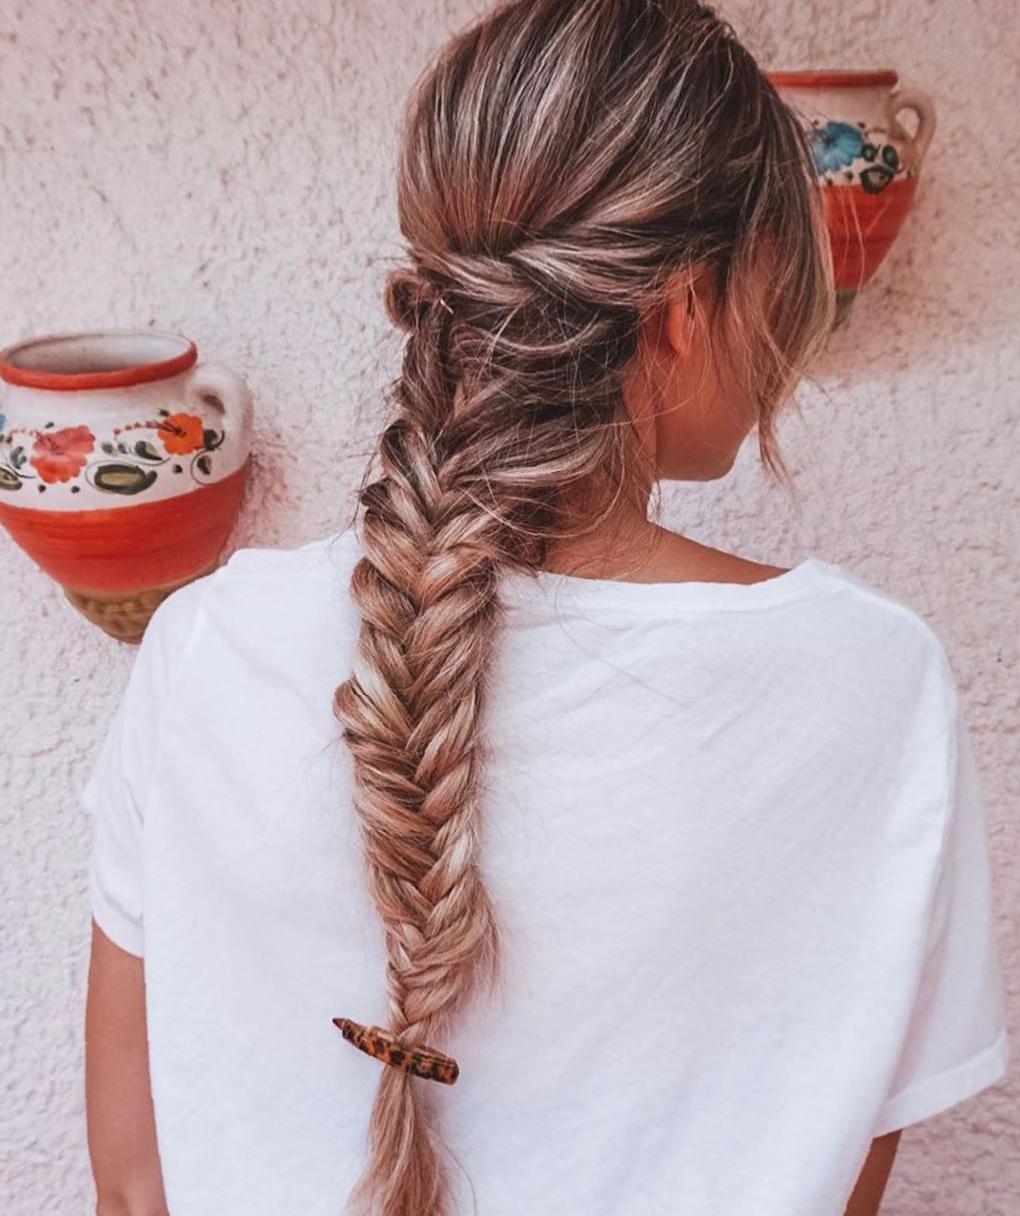 35 Amazing Braided Hairstyles for Long Hair for Summer - SooShell